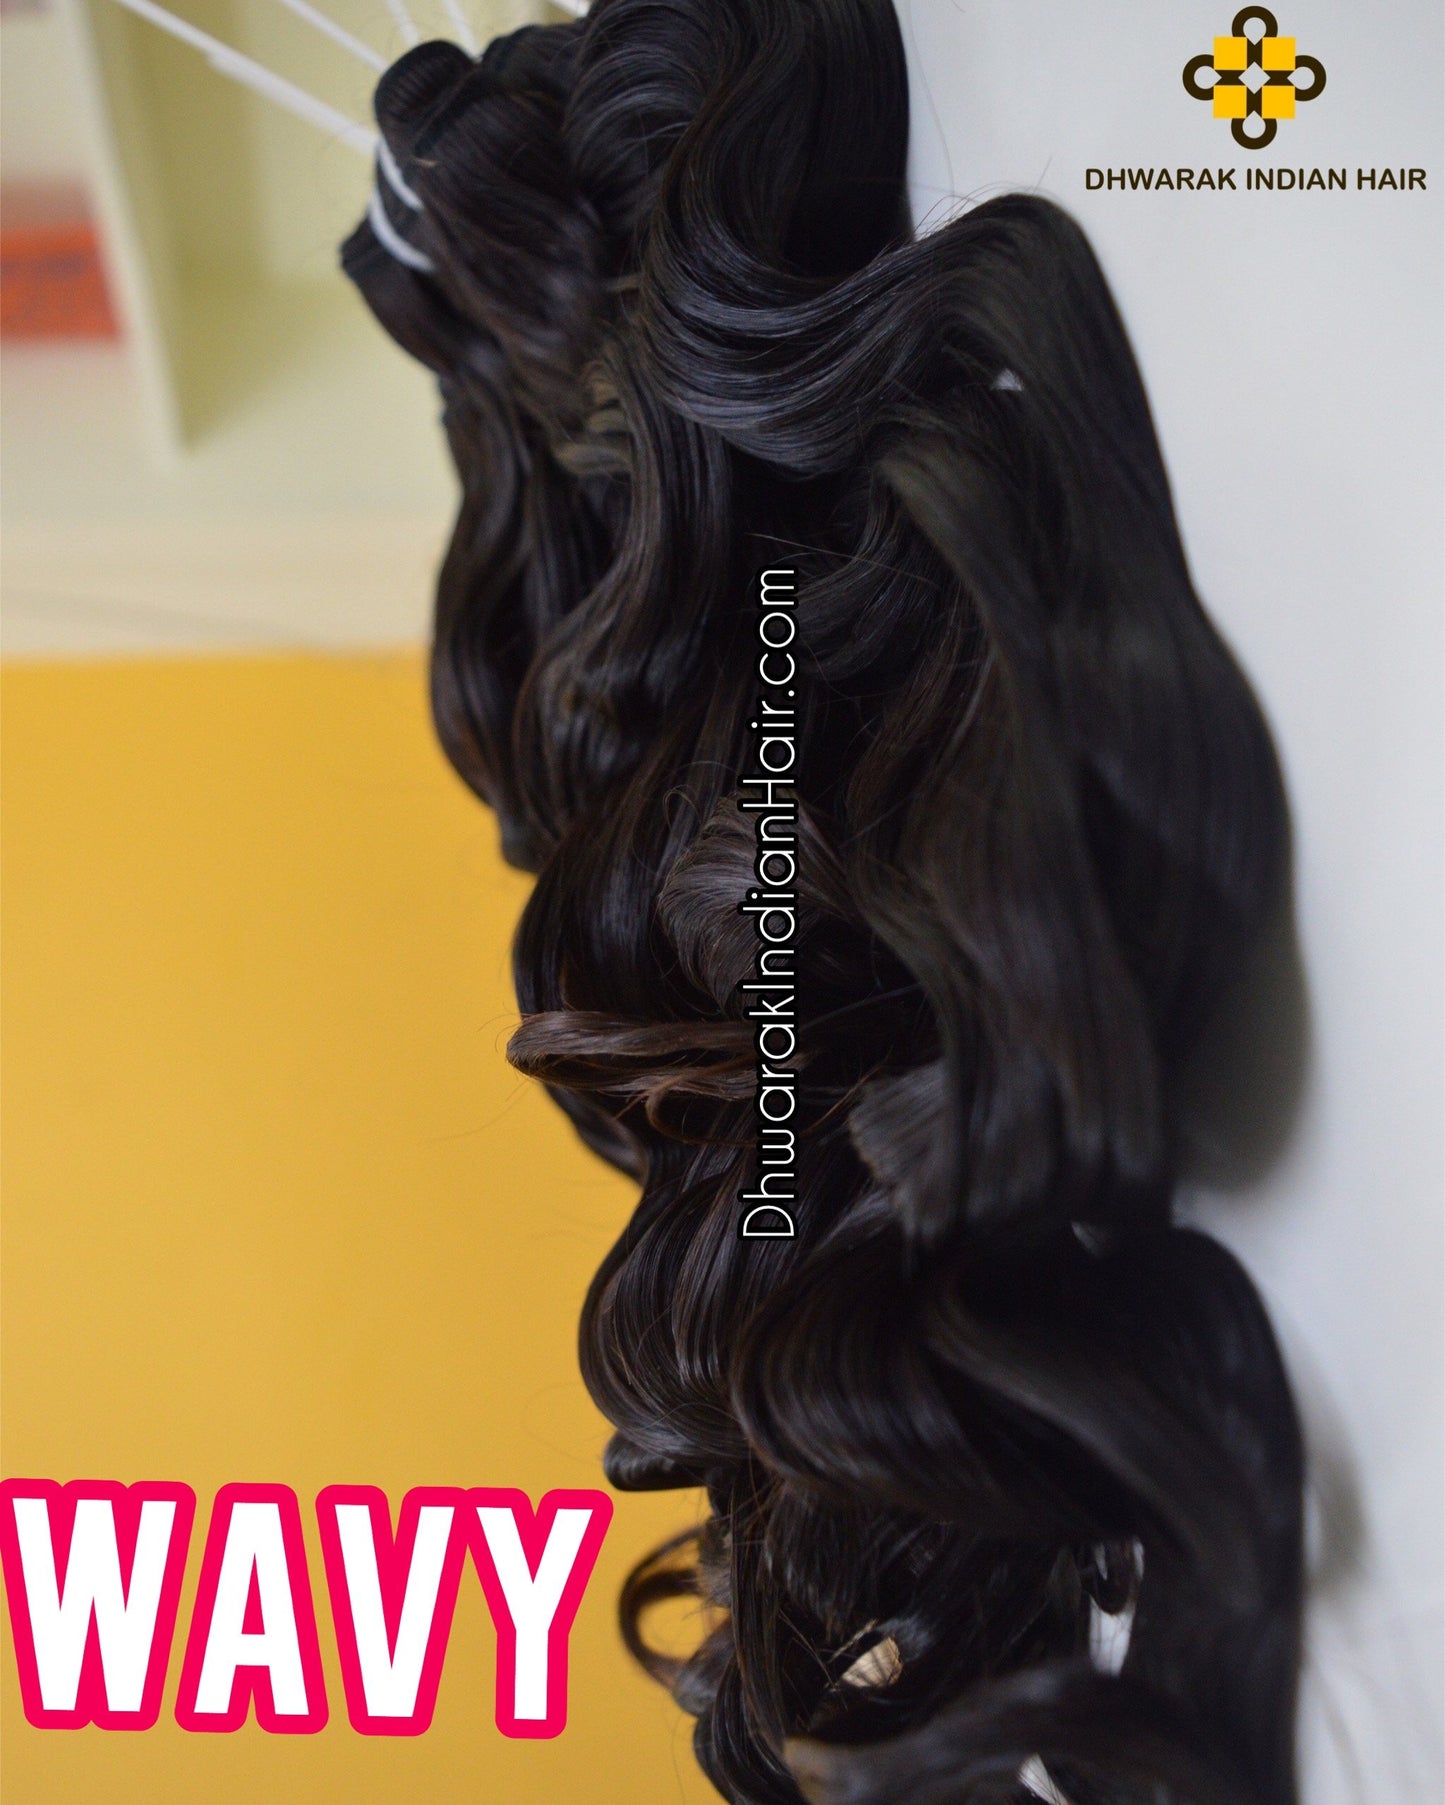 Raw Indian Wavy Hair Weave, wavy hair extensions, human hair extensions